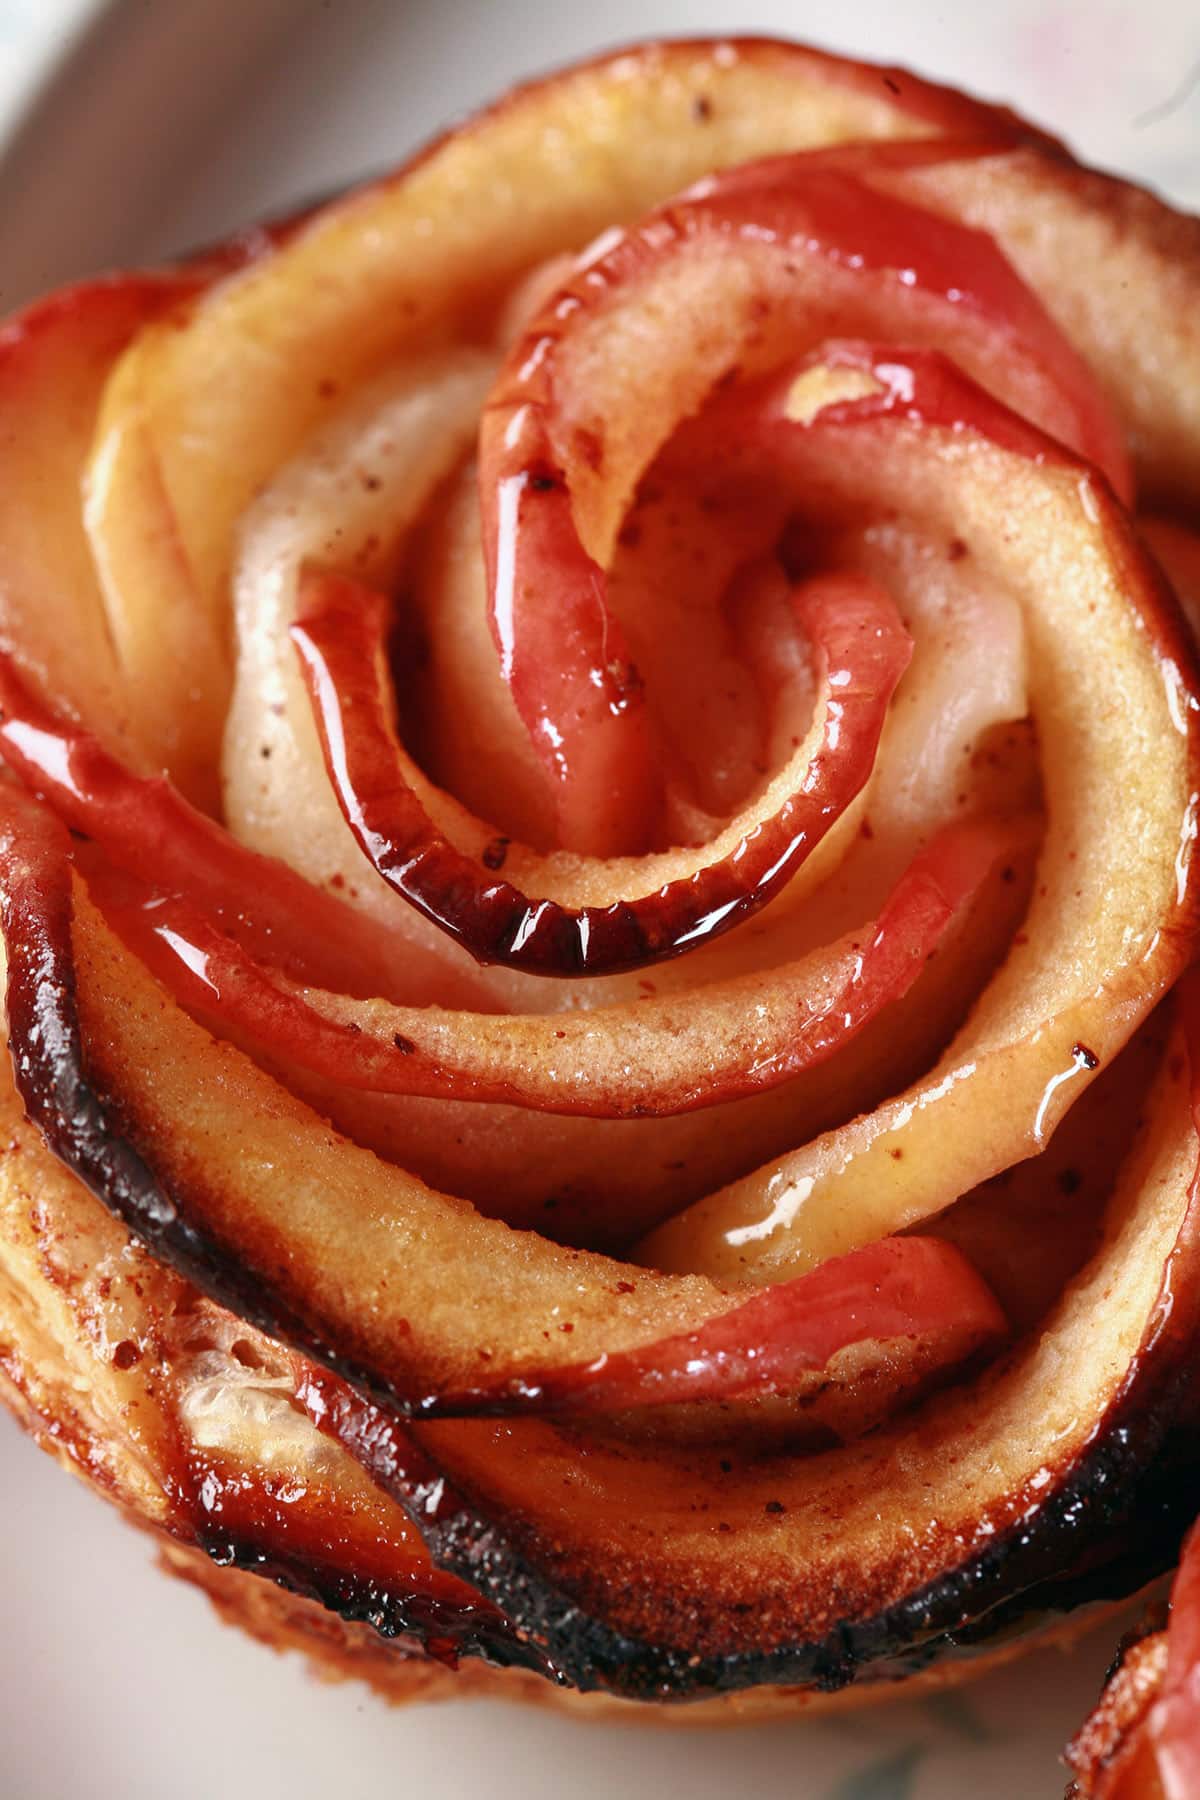 A close up view of an apple rose pastry.